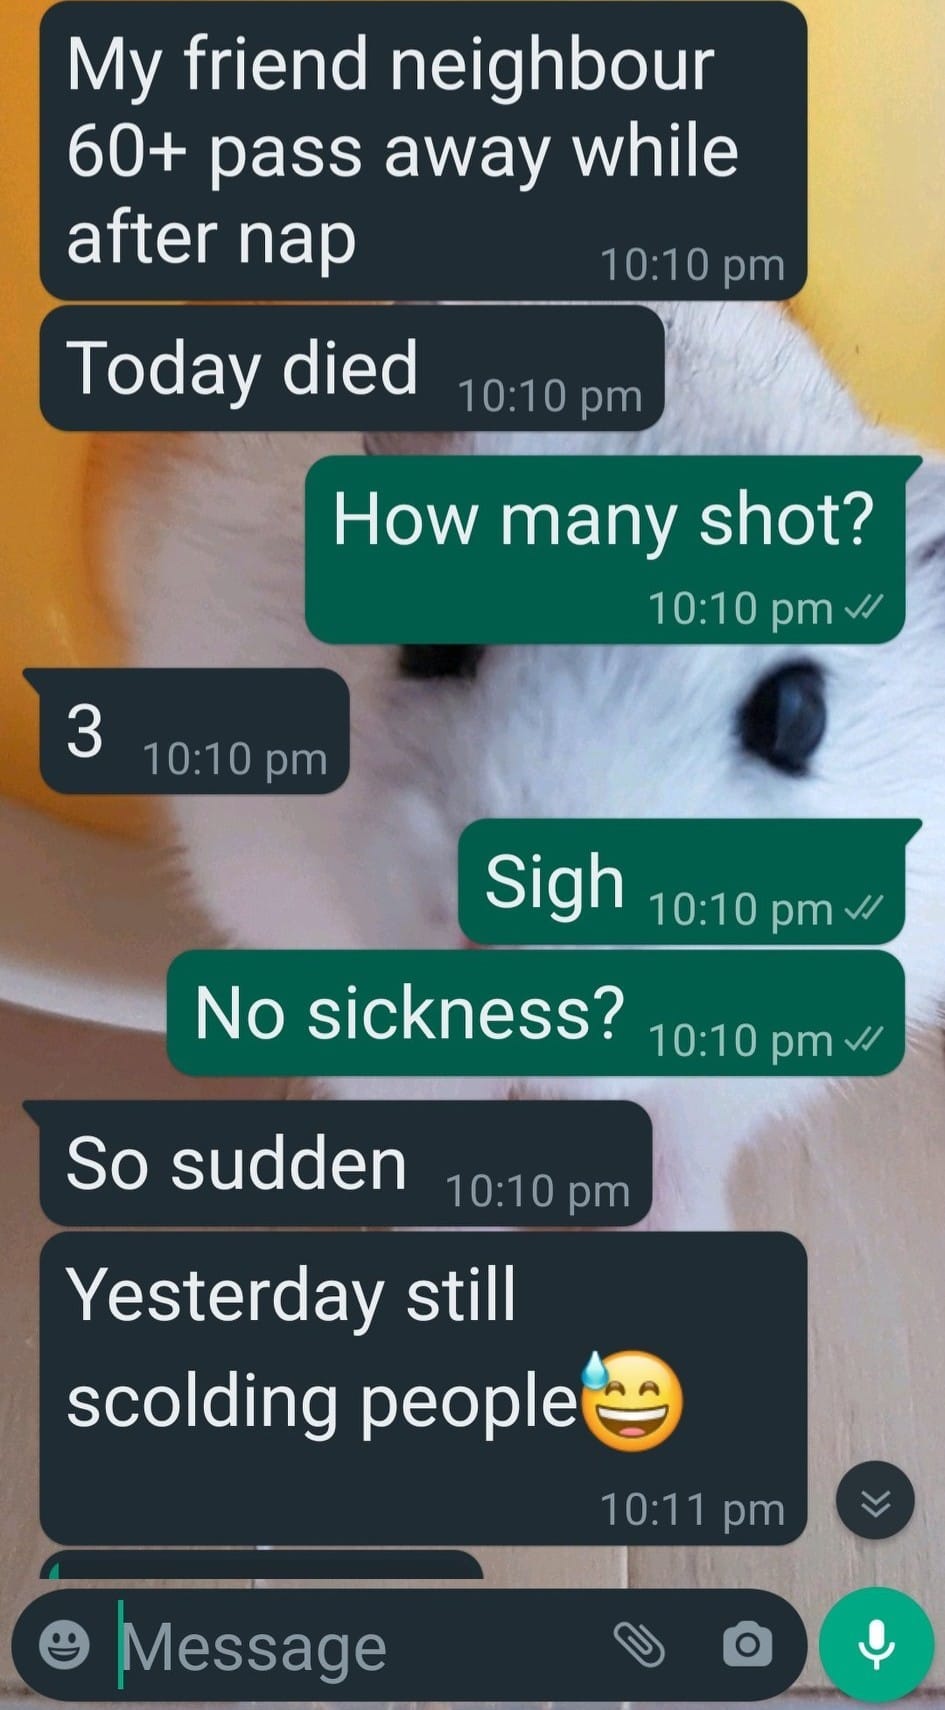 May be an image of text that says "My friend neighbour 60+ pass away while after nap 10:10 pm Today died 10:10pm How many shot? 10:10 pm 3 10:10 10:10pm pm Sigh 10:10 pm No sickness? 10:10 pm So sudden 10:10 pm Yesterday still scolding people 10:11 10:11pm pm Message"